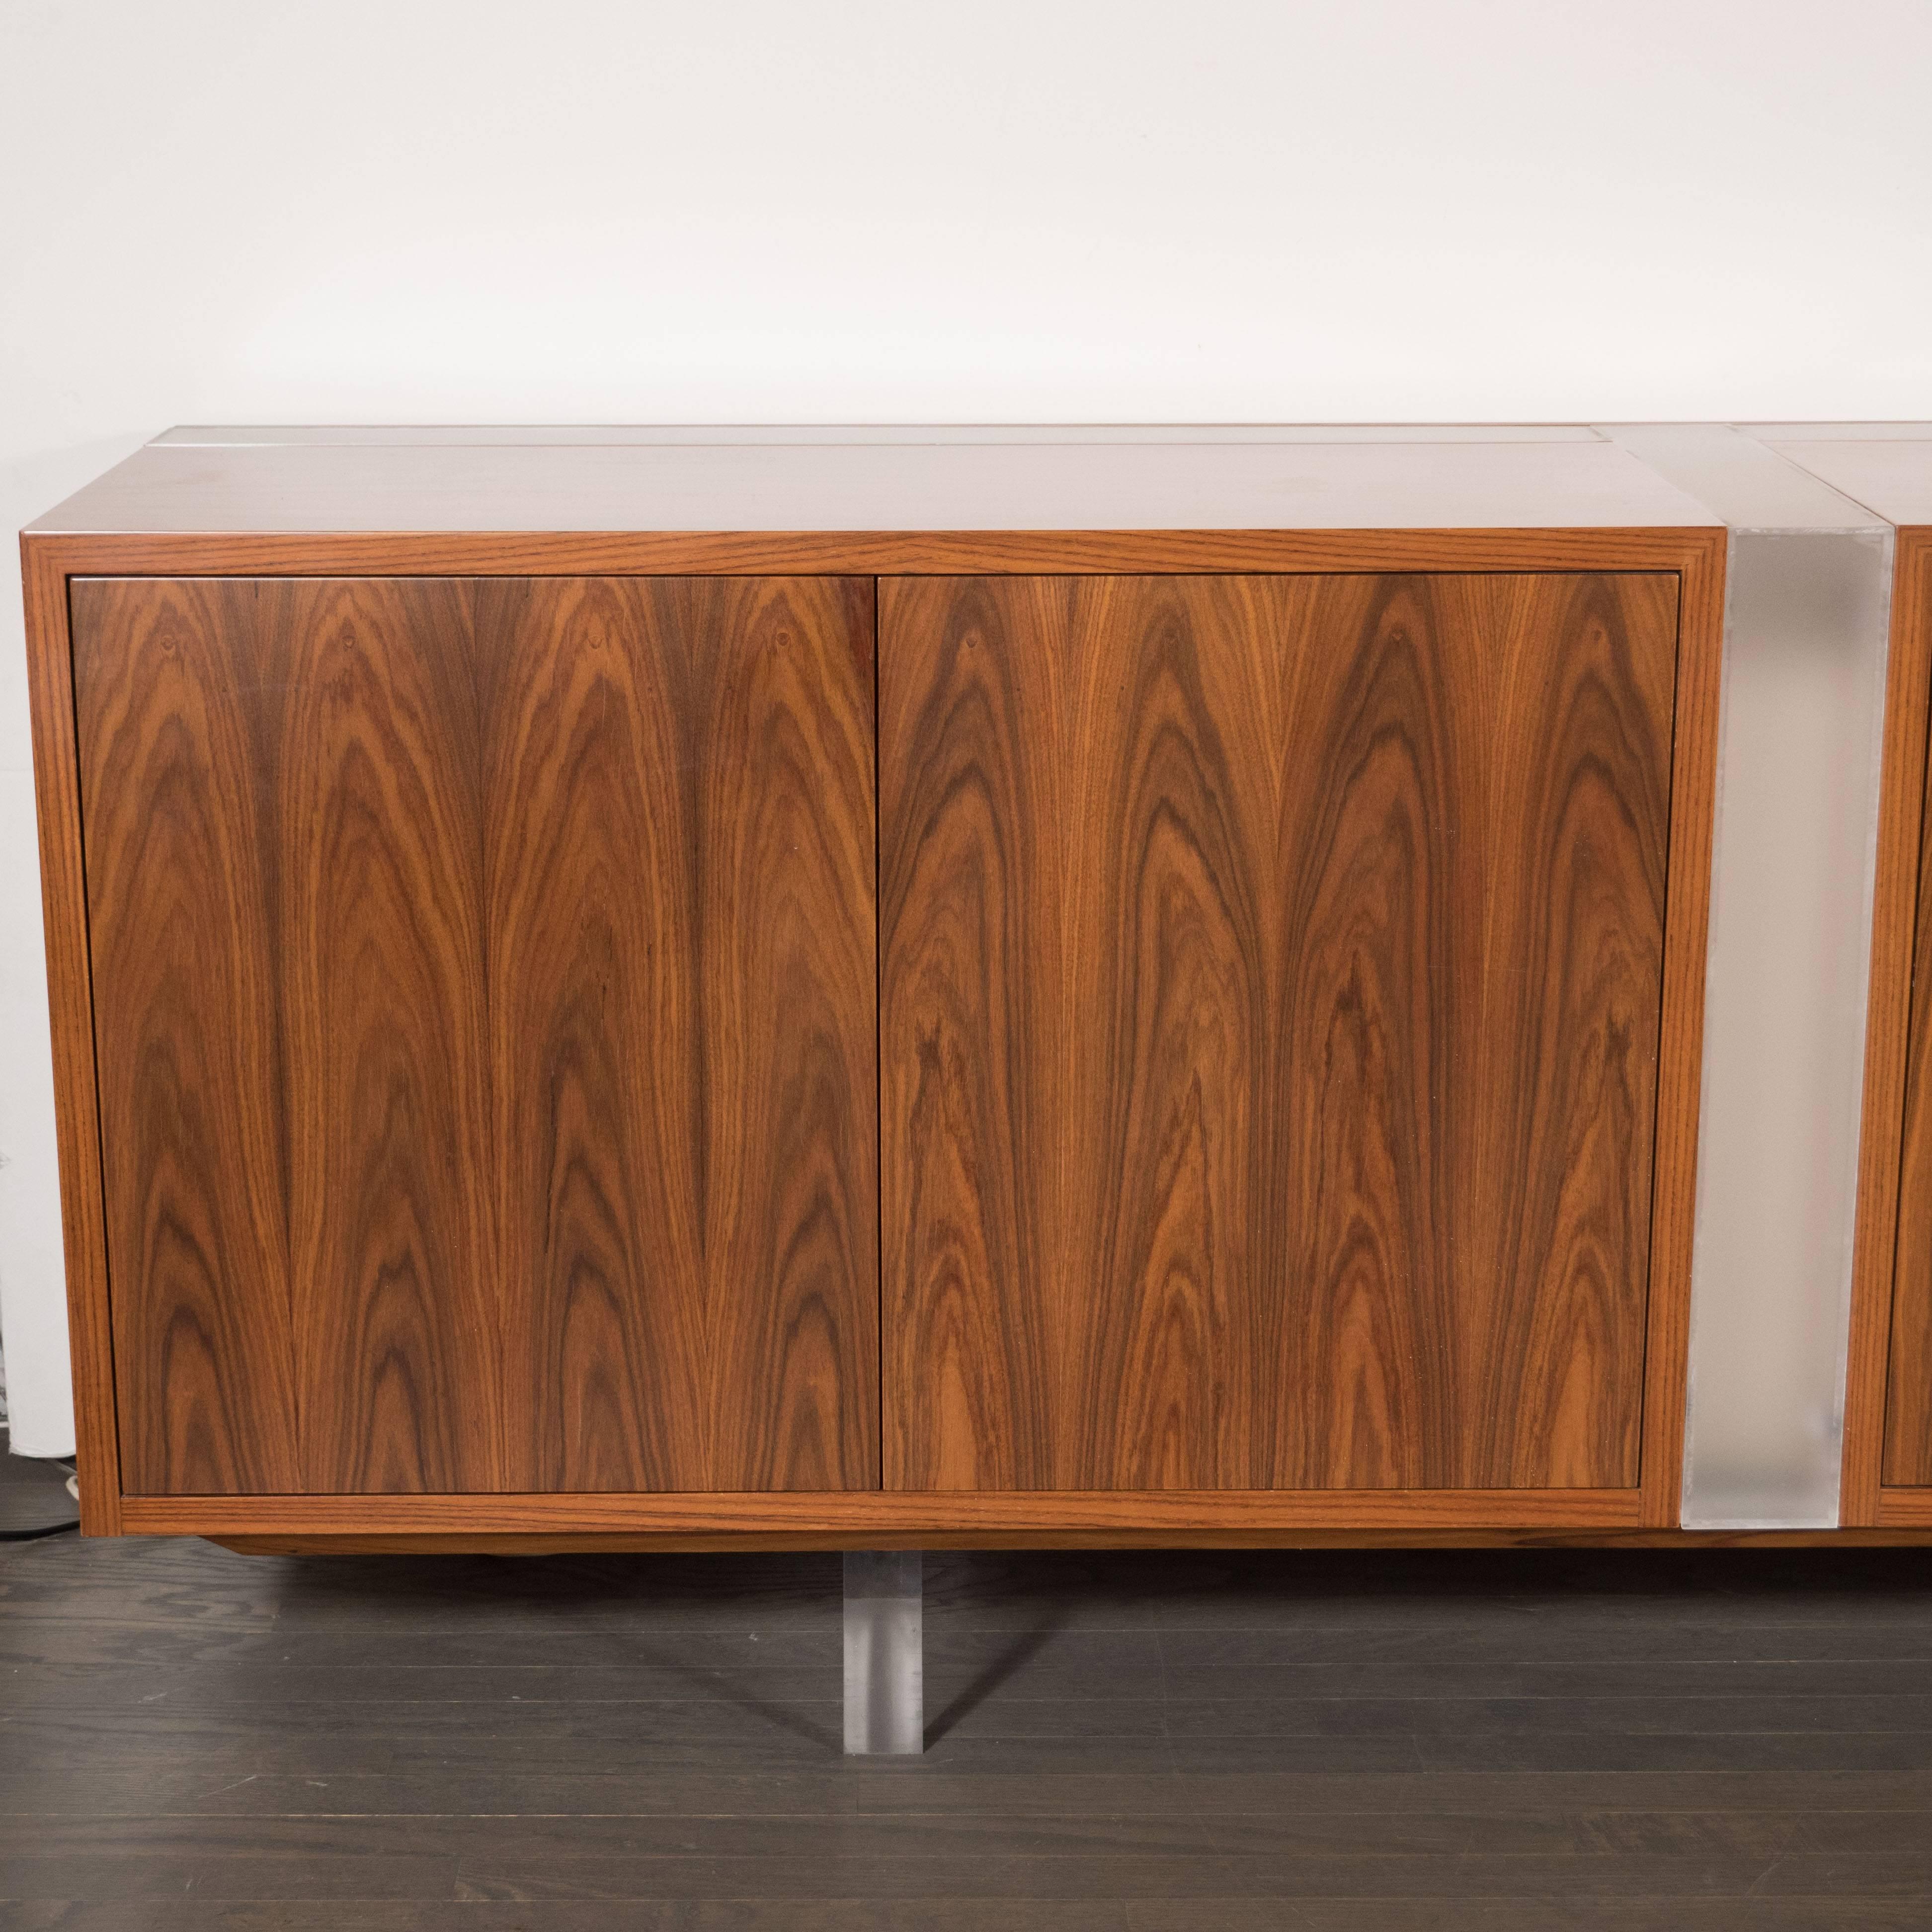 This rare and iconic sideboard or cabinet was designed by Vladimir Kagan- one of the most celebrated and influential designers of the 20th century, circa 1960. This piece executed in Santos rosewood- that exhibits a particularly stunning grain- and